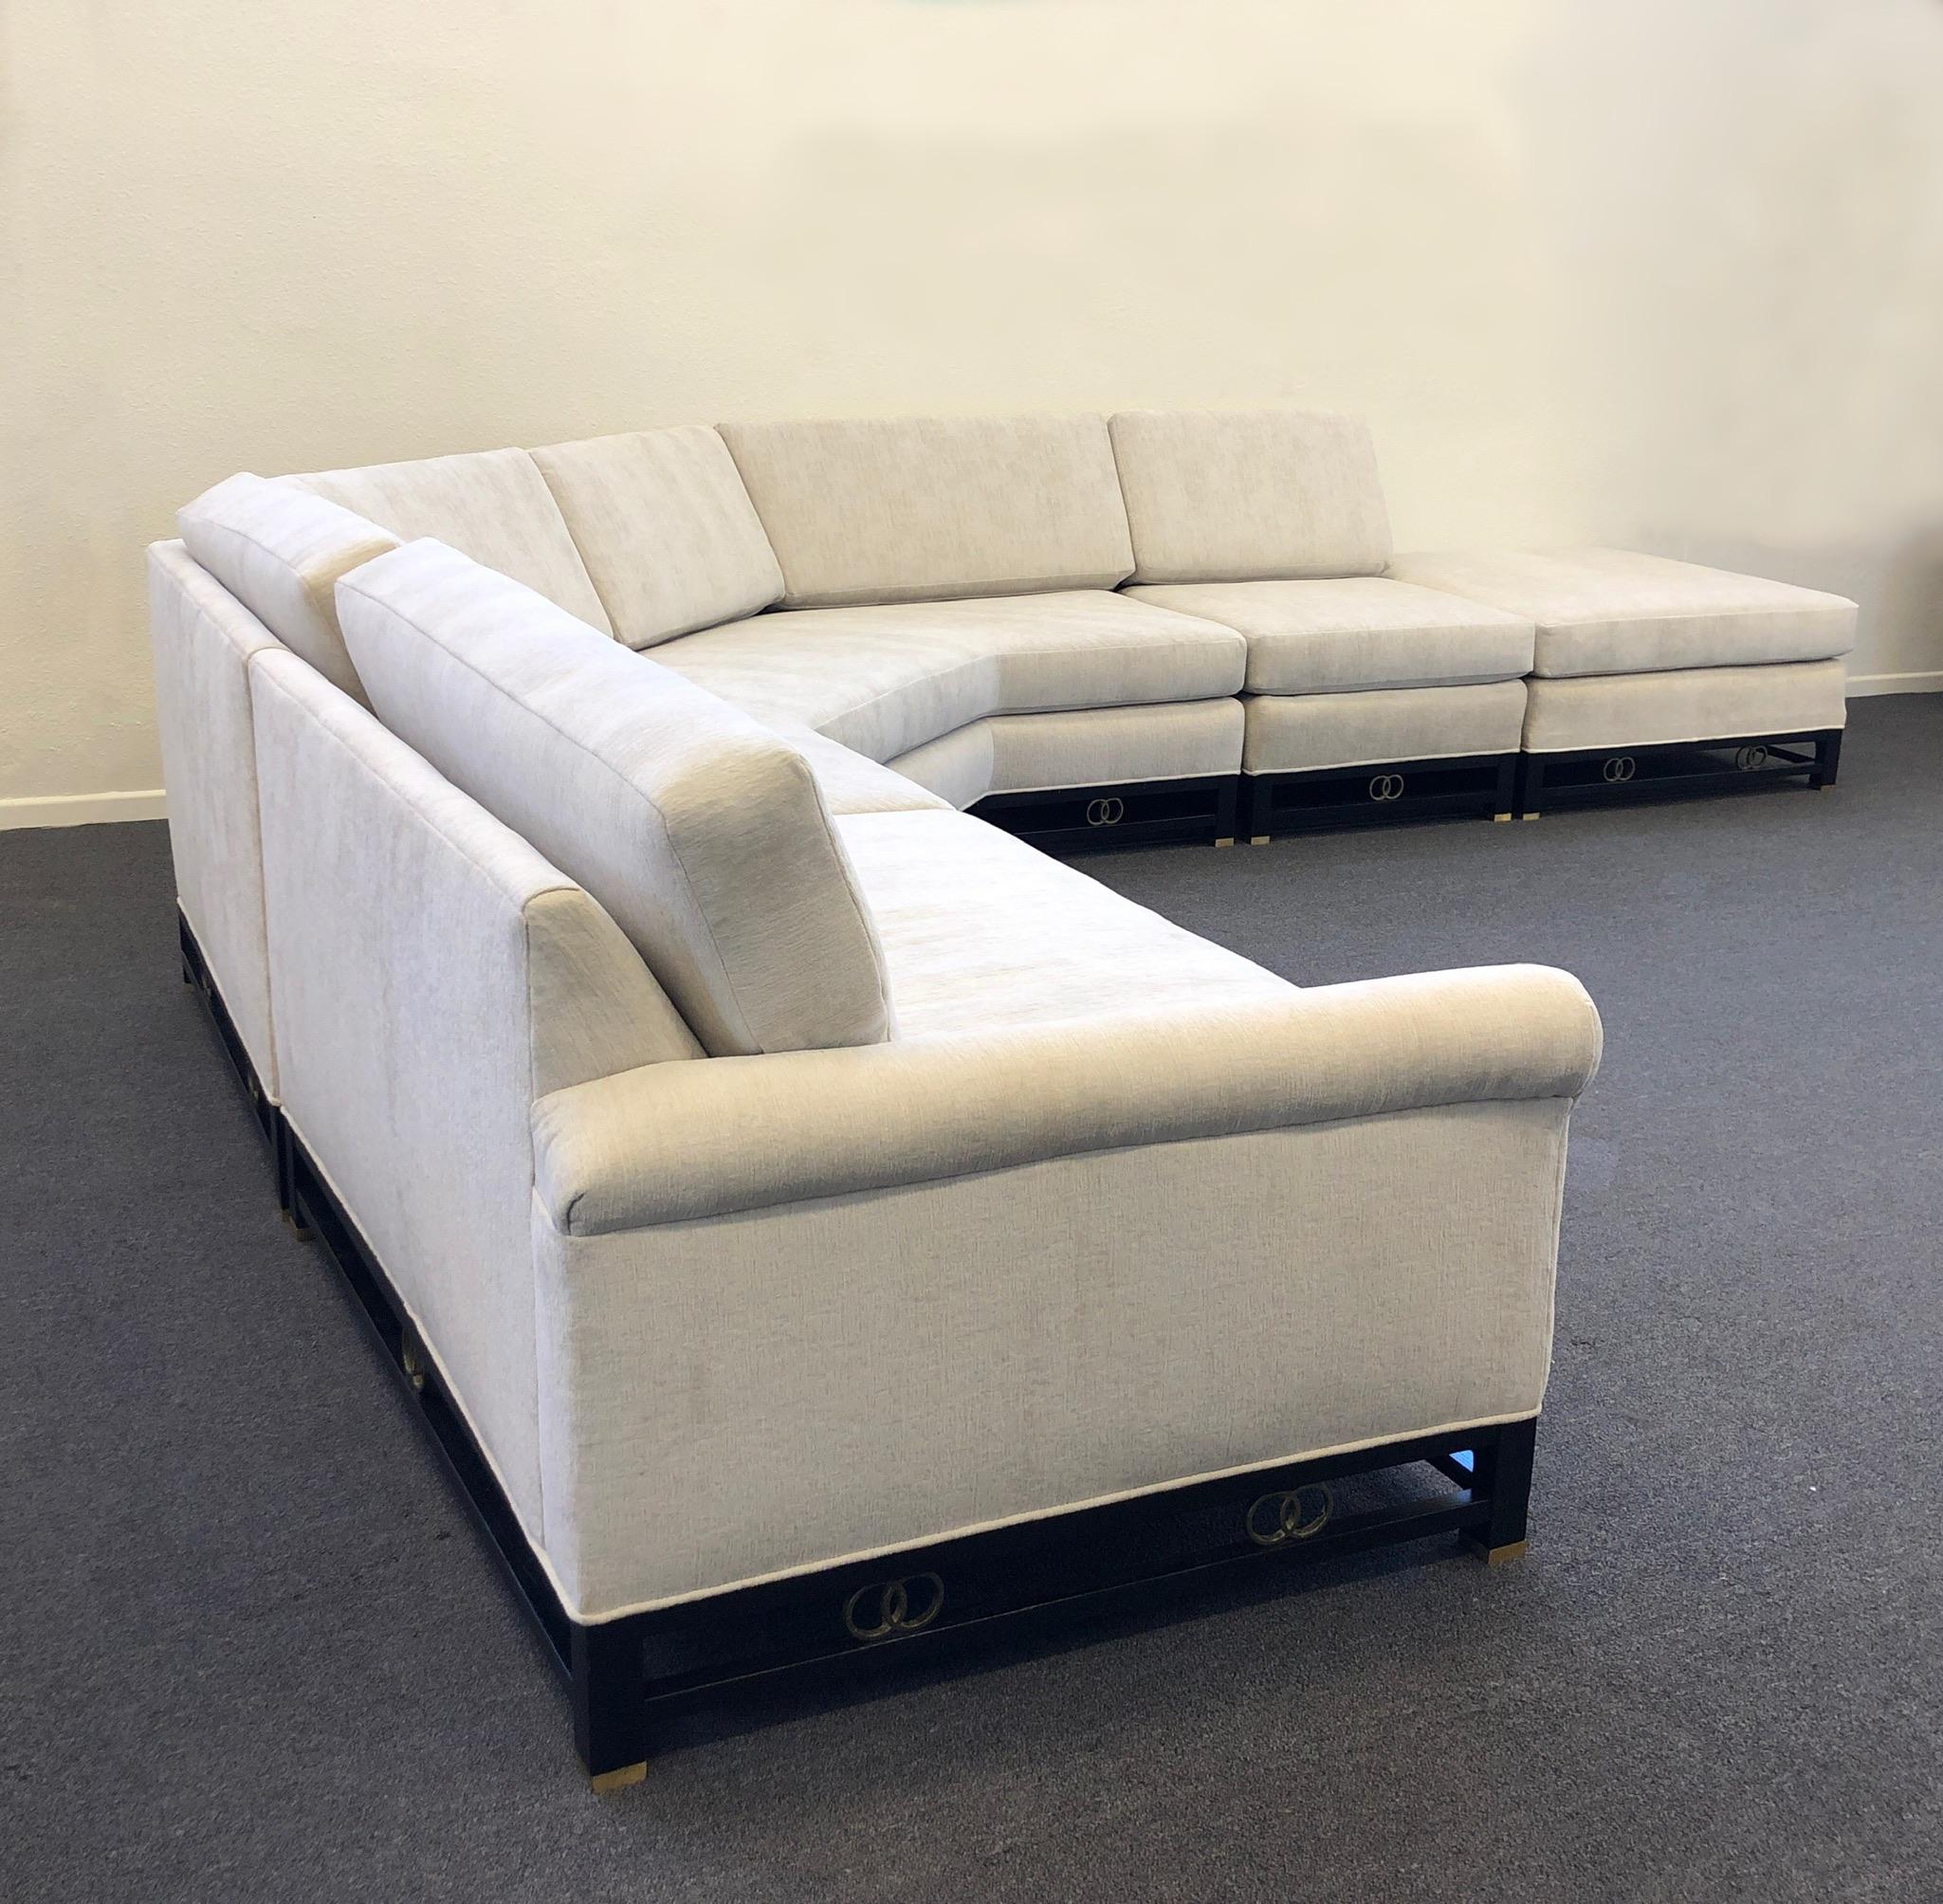 1950’s four piece black lacquered and brass with off white fabric sectional sofa by Michael Taylor for Baker Furniture Co. 
Newly recovered with a soft off white chenille fabric. The legs are black lacquered wood with brass details. 
It can be